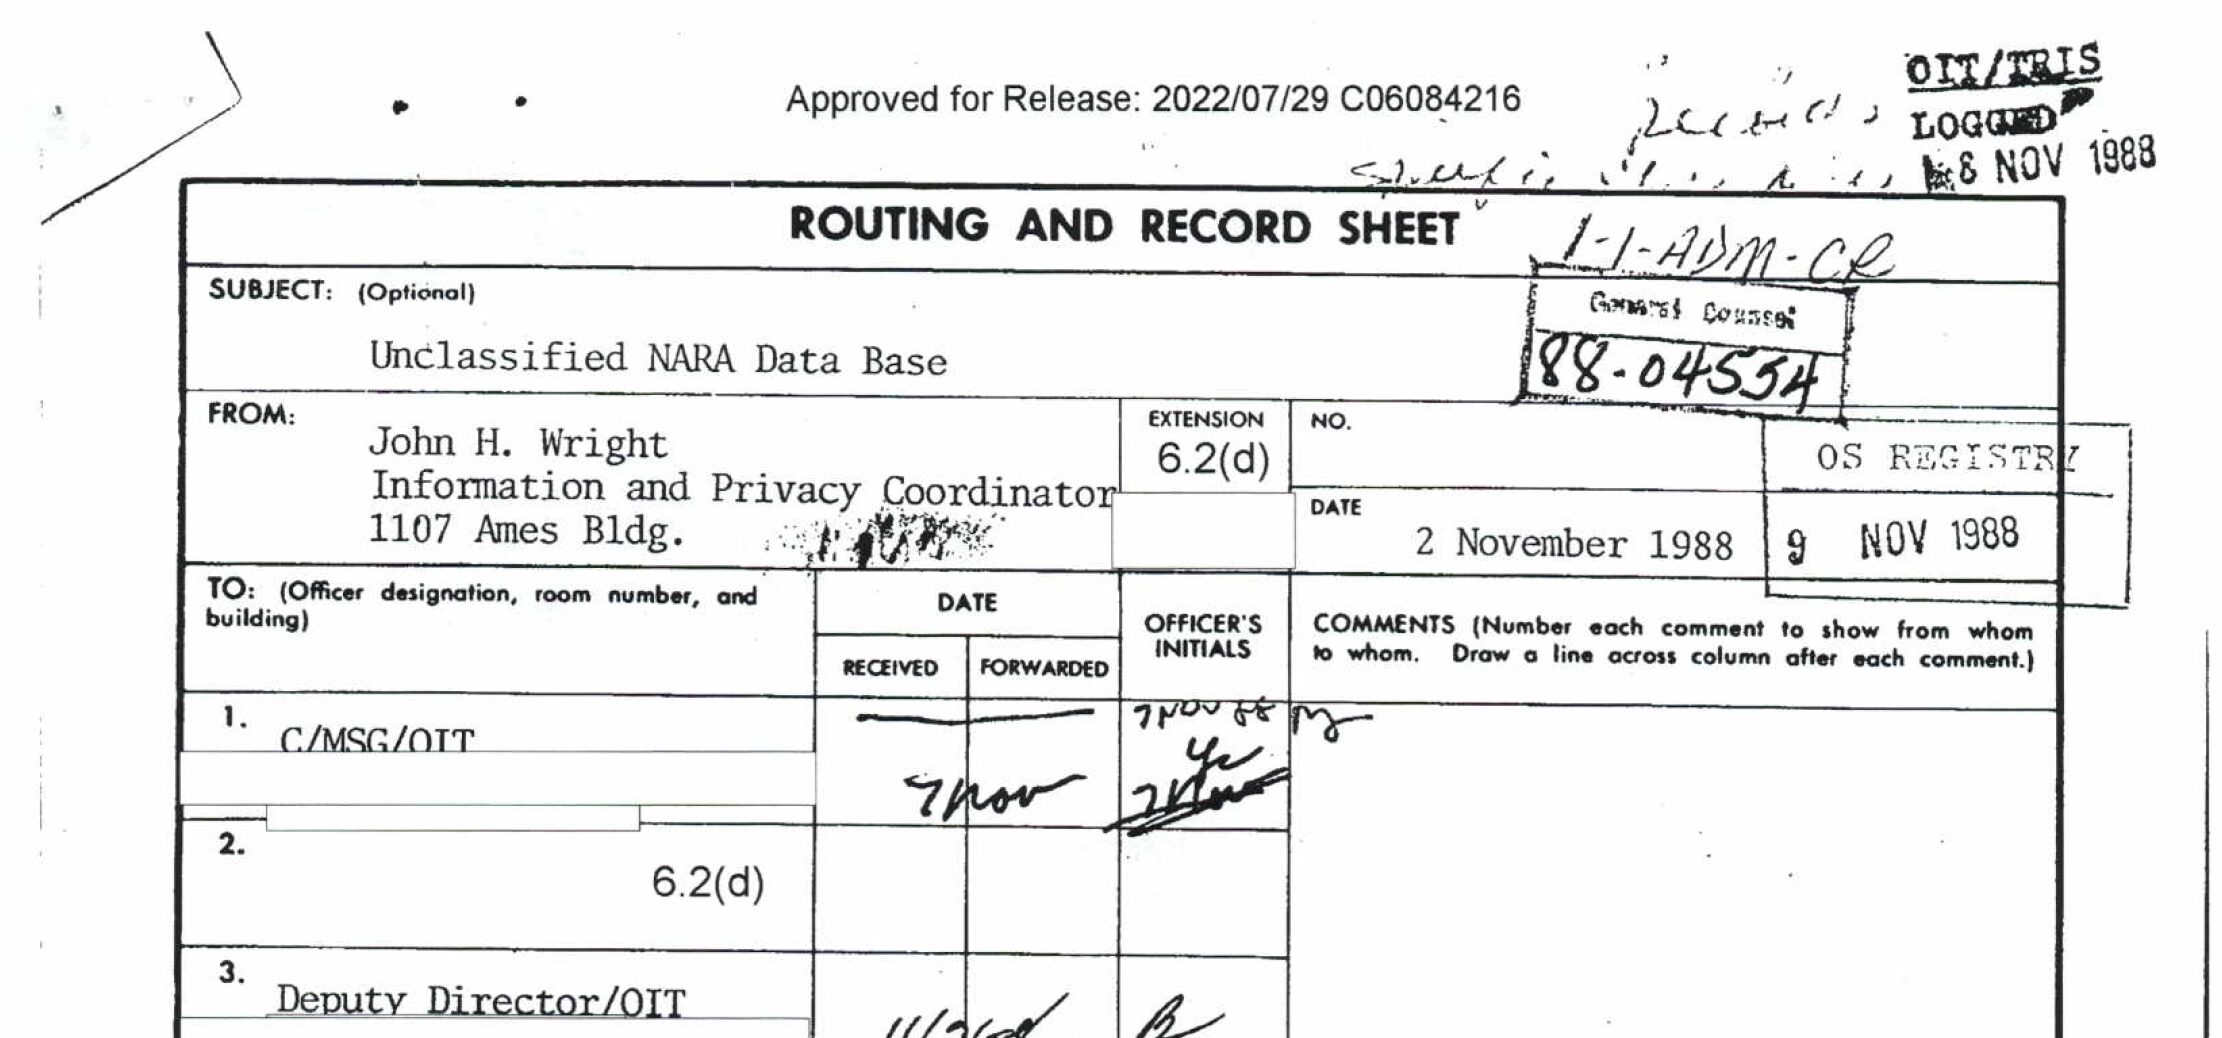 National Archive and Records Administration (NARA) Index of Classified Records, November 1988